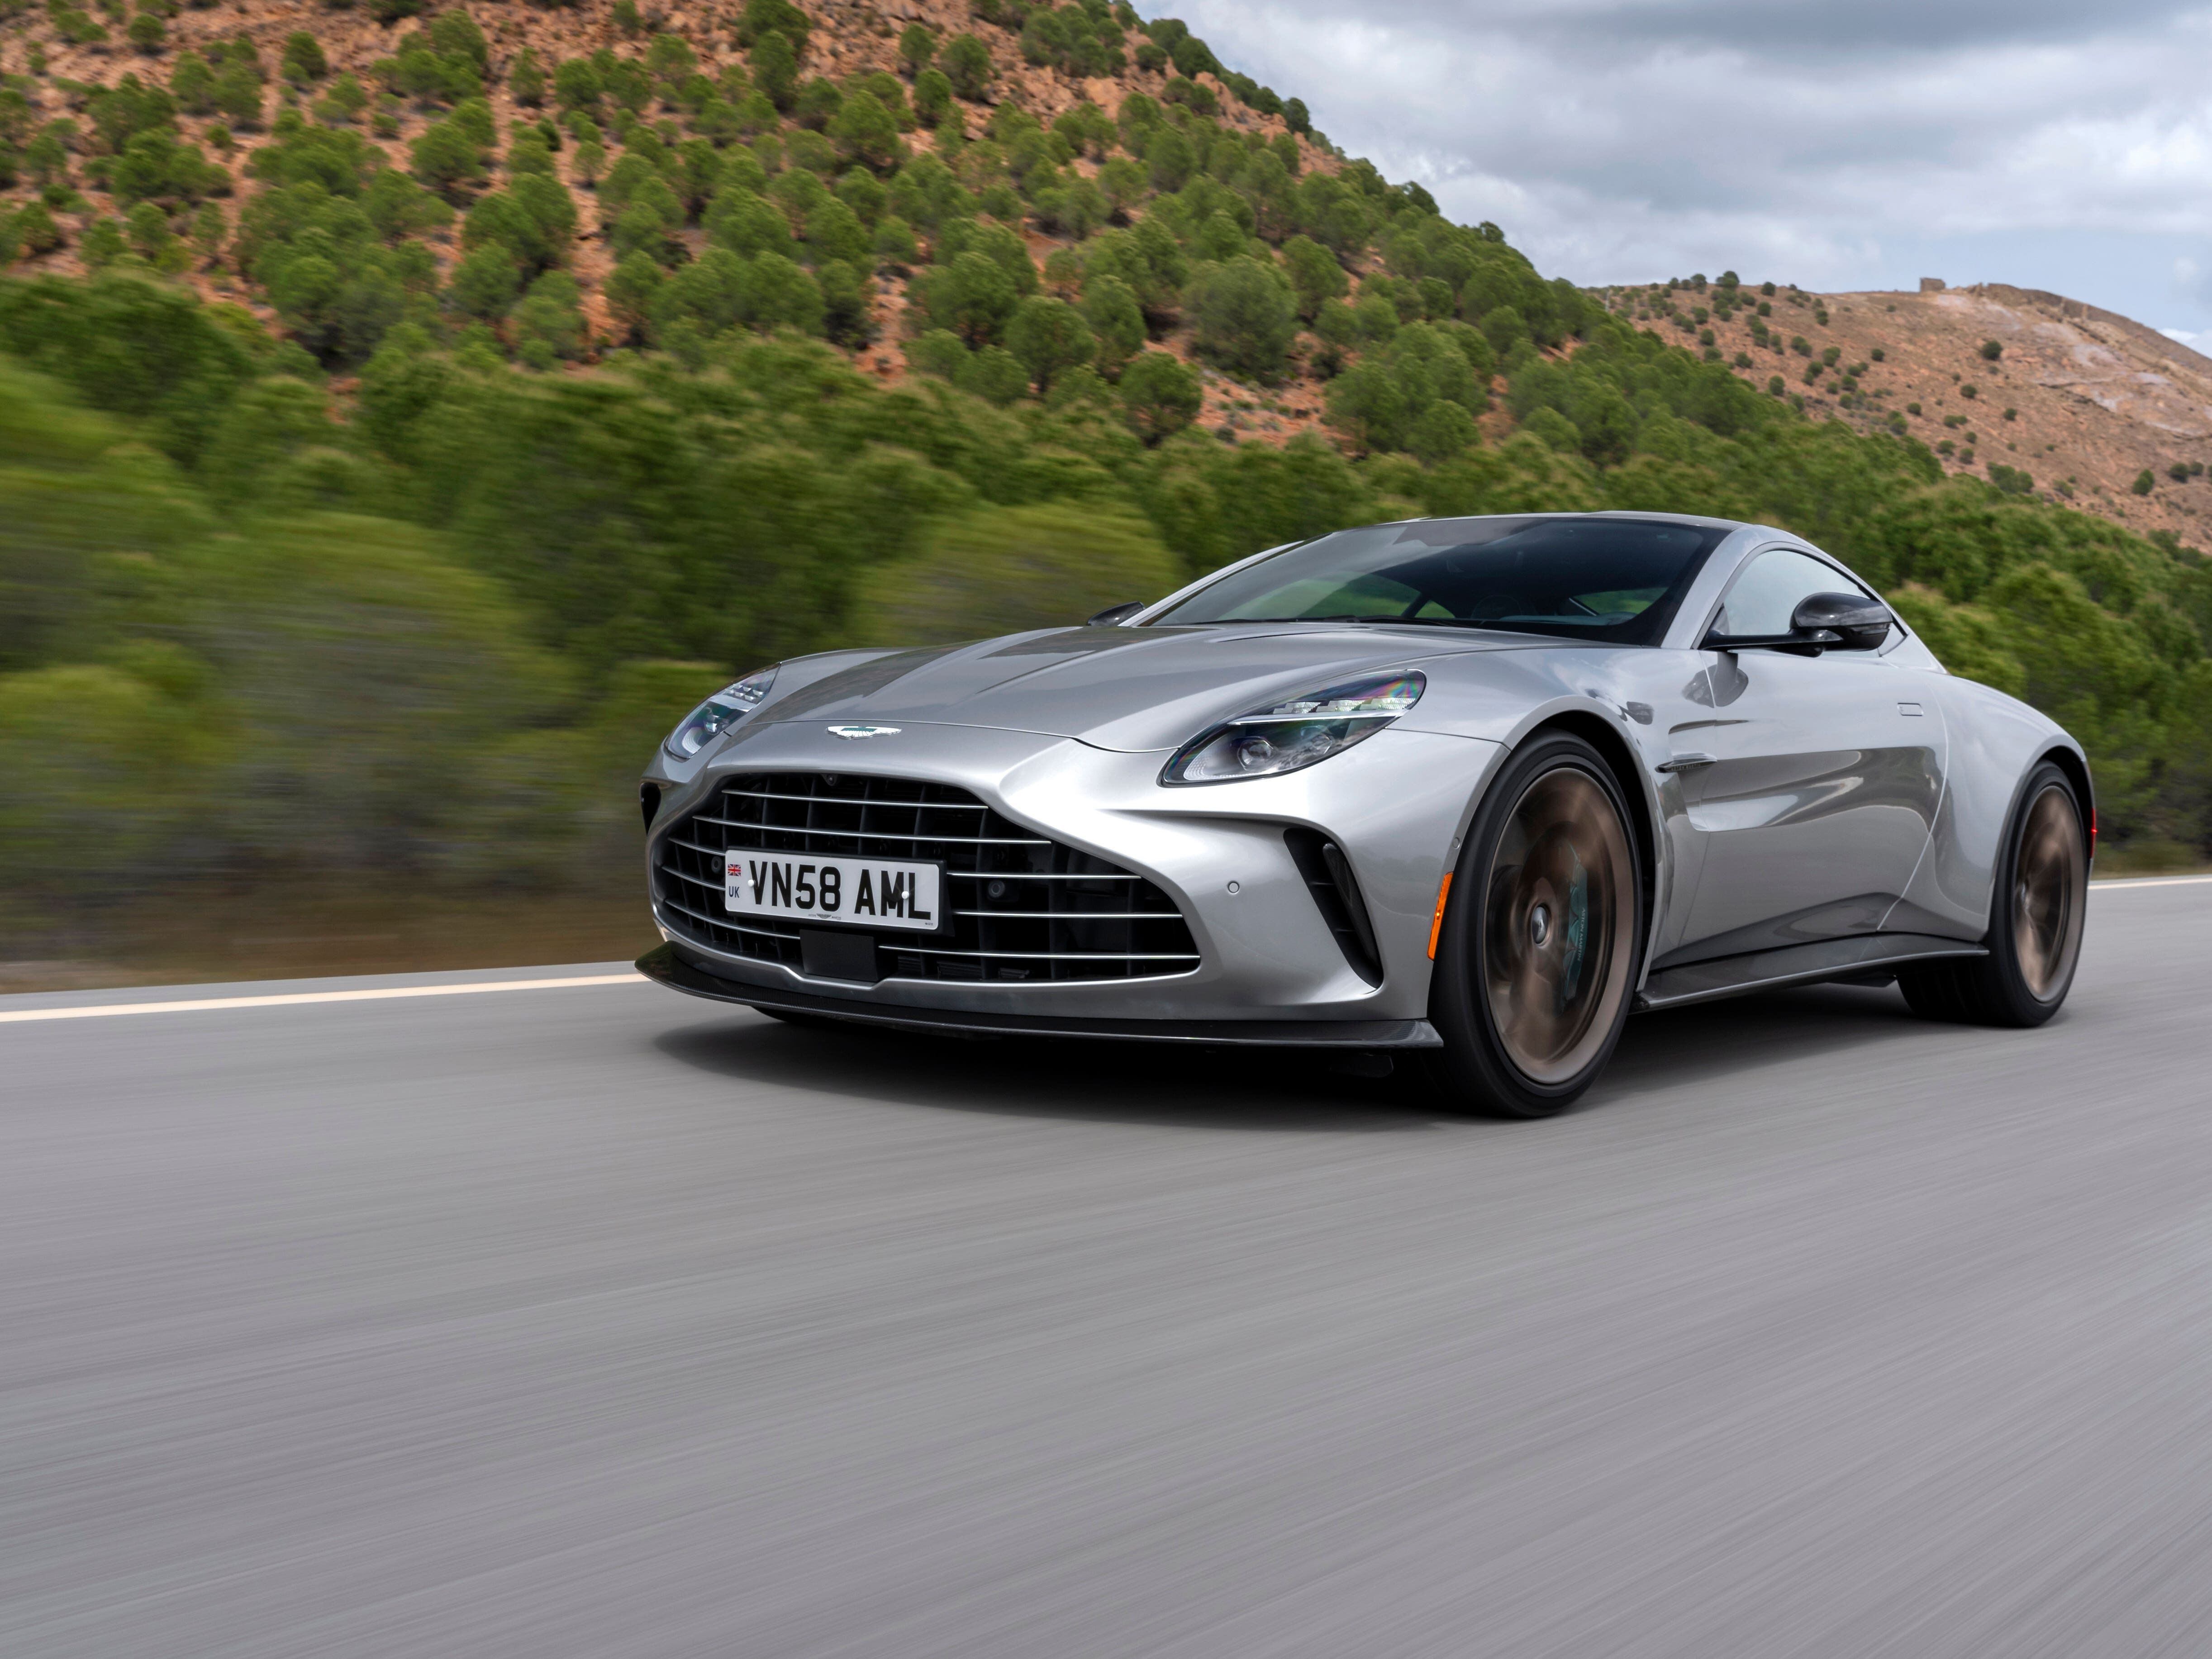 First Drive: Aston Martin’s Vantage is back with a sharp new focus